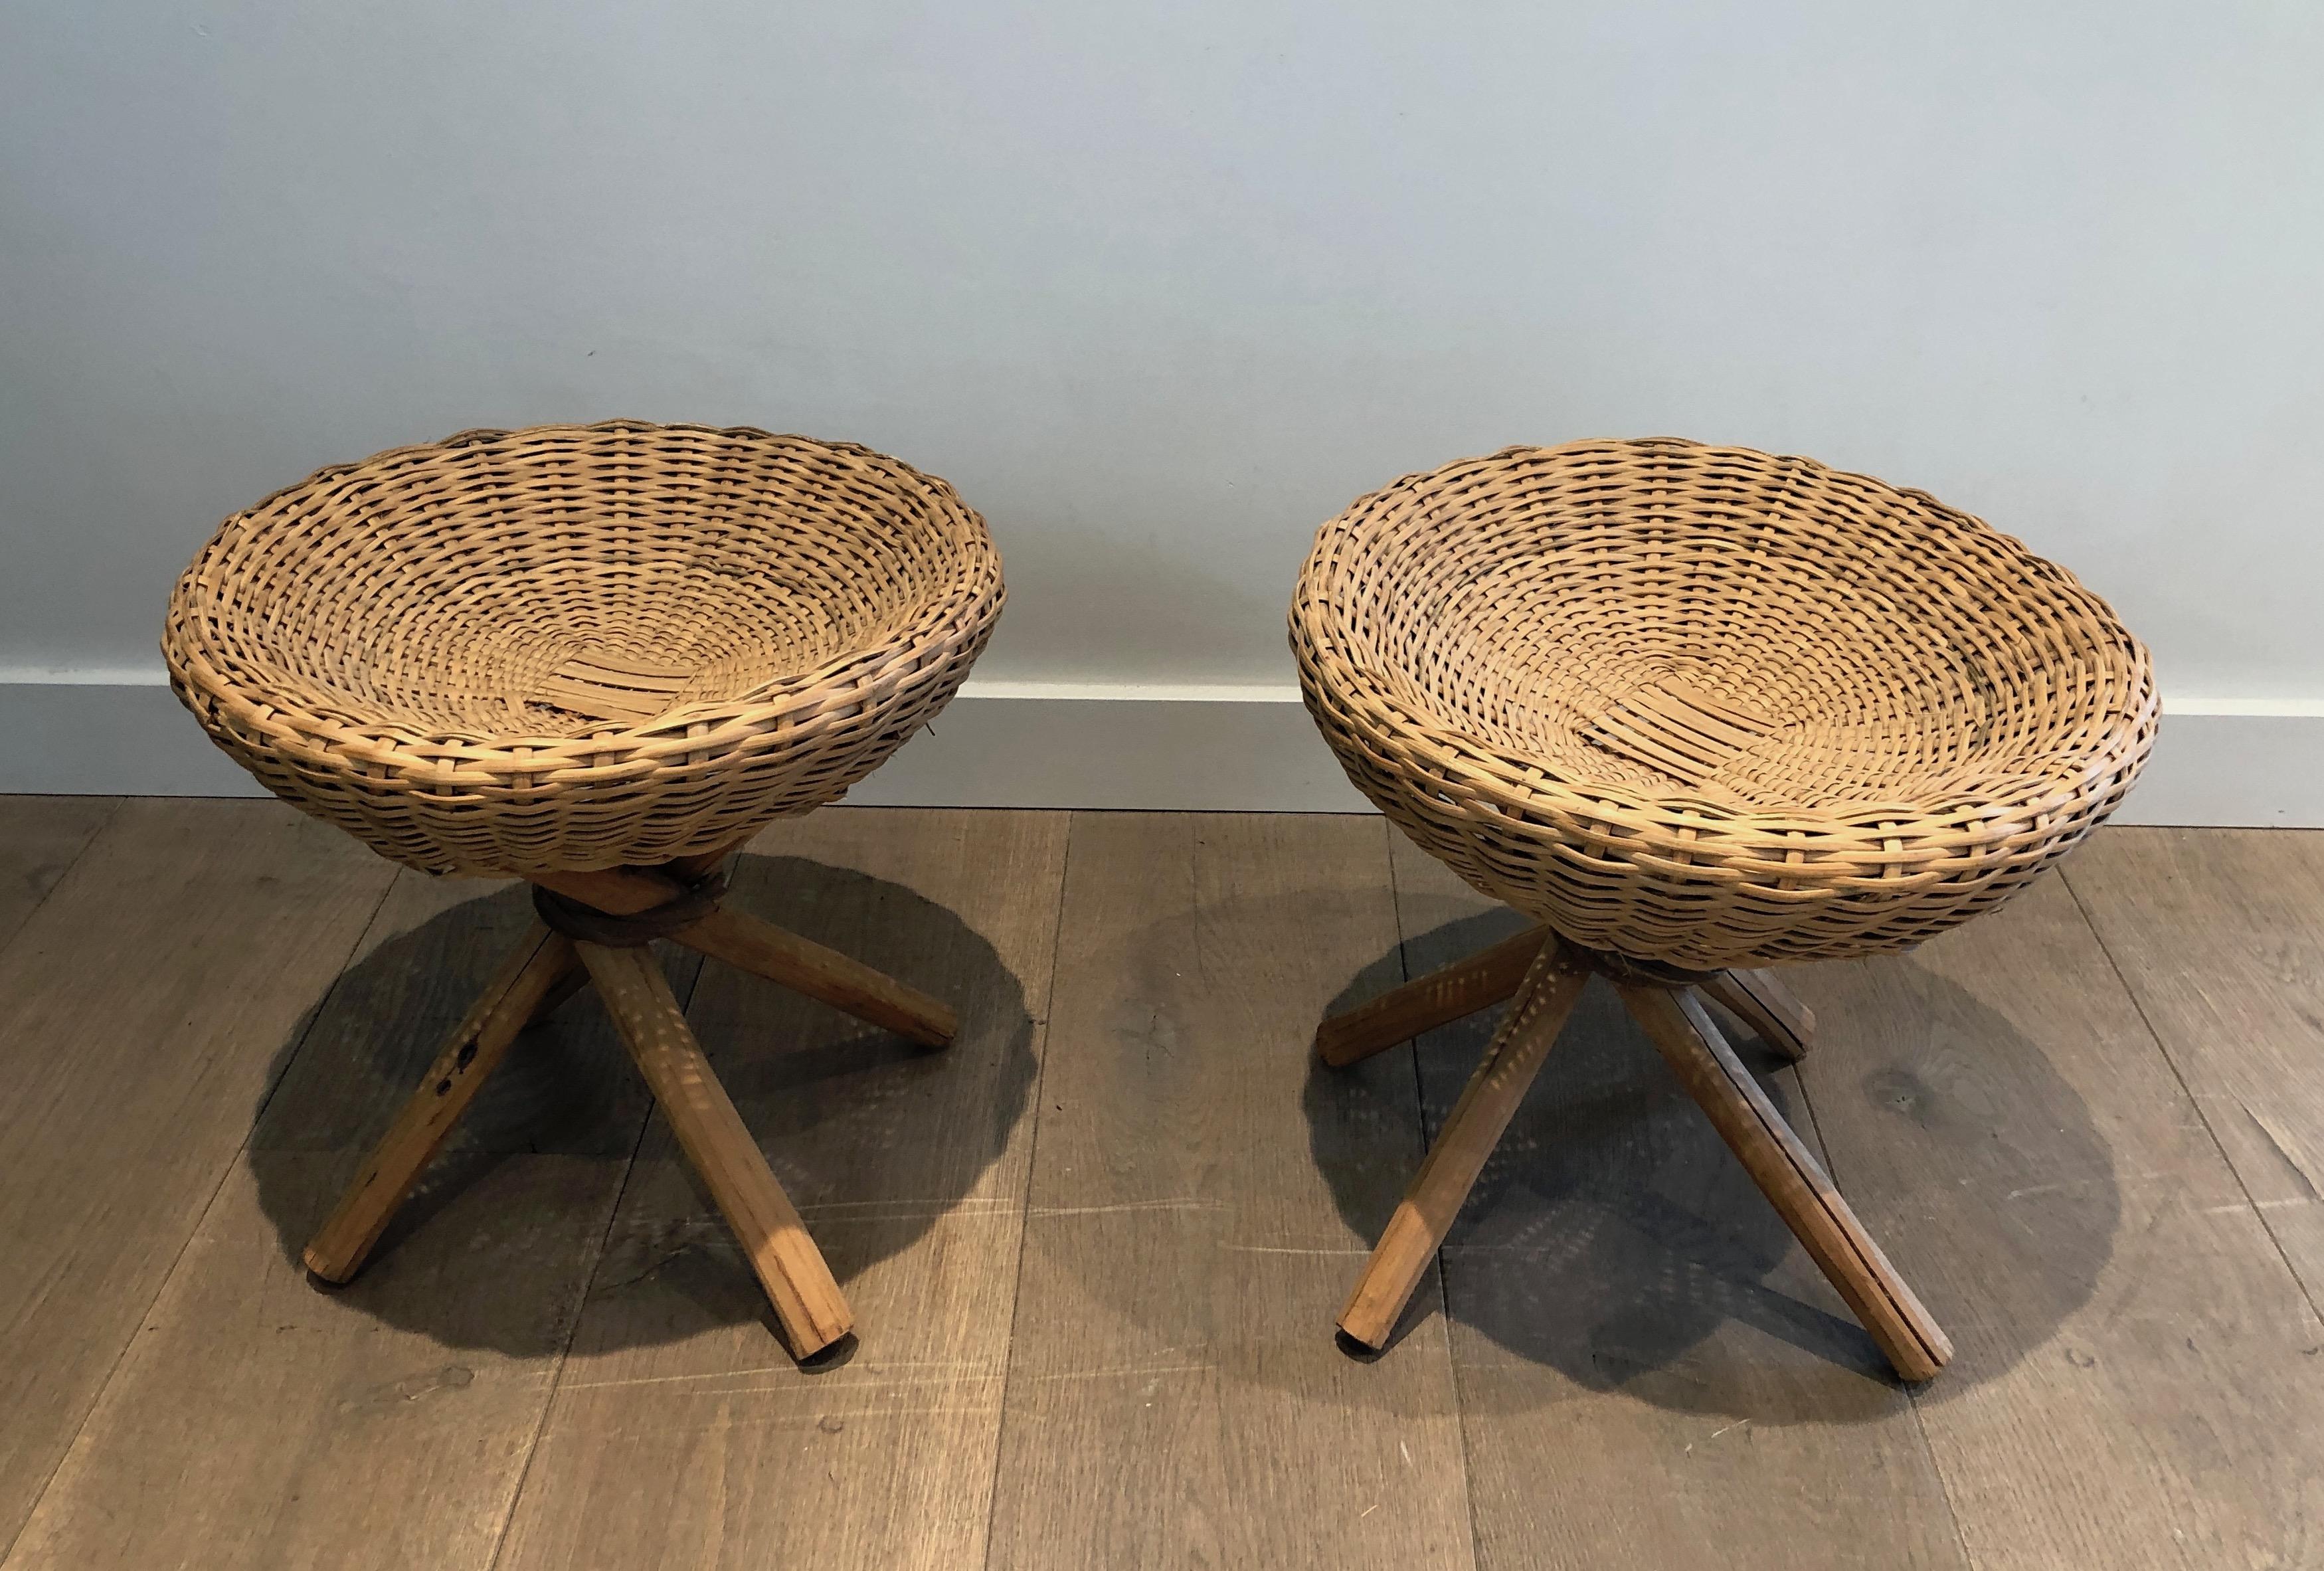 Pair of Wood and Rattan Stools, French, Circa 1970 For Sale 5